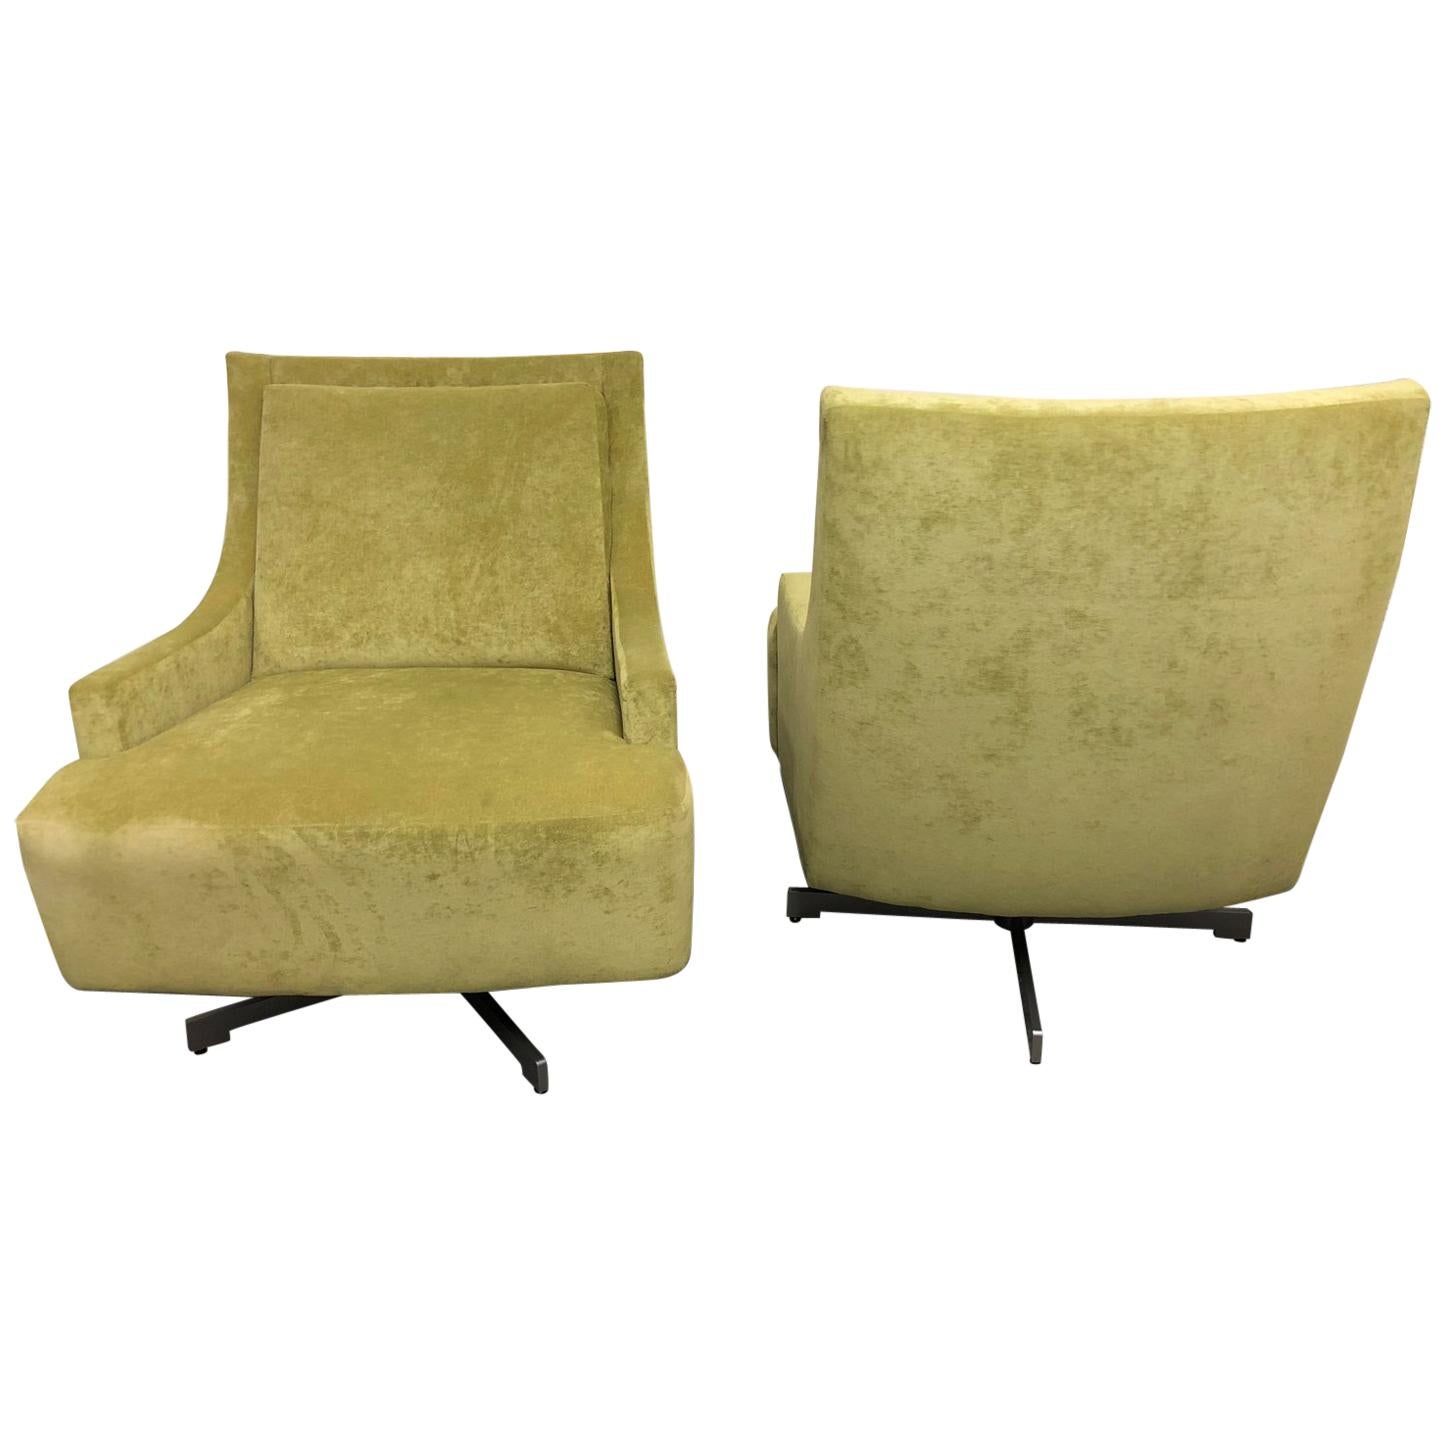 Pair of H B F Barbara Barry Pastel Green Upholstered Scoop Chairs For Sale